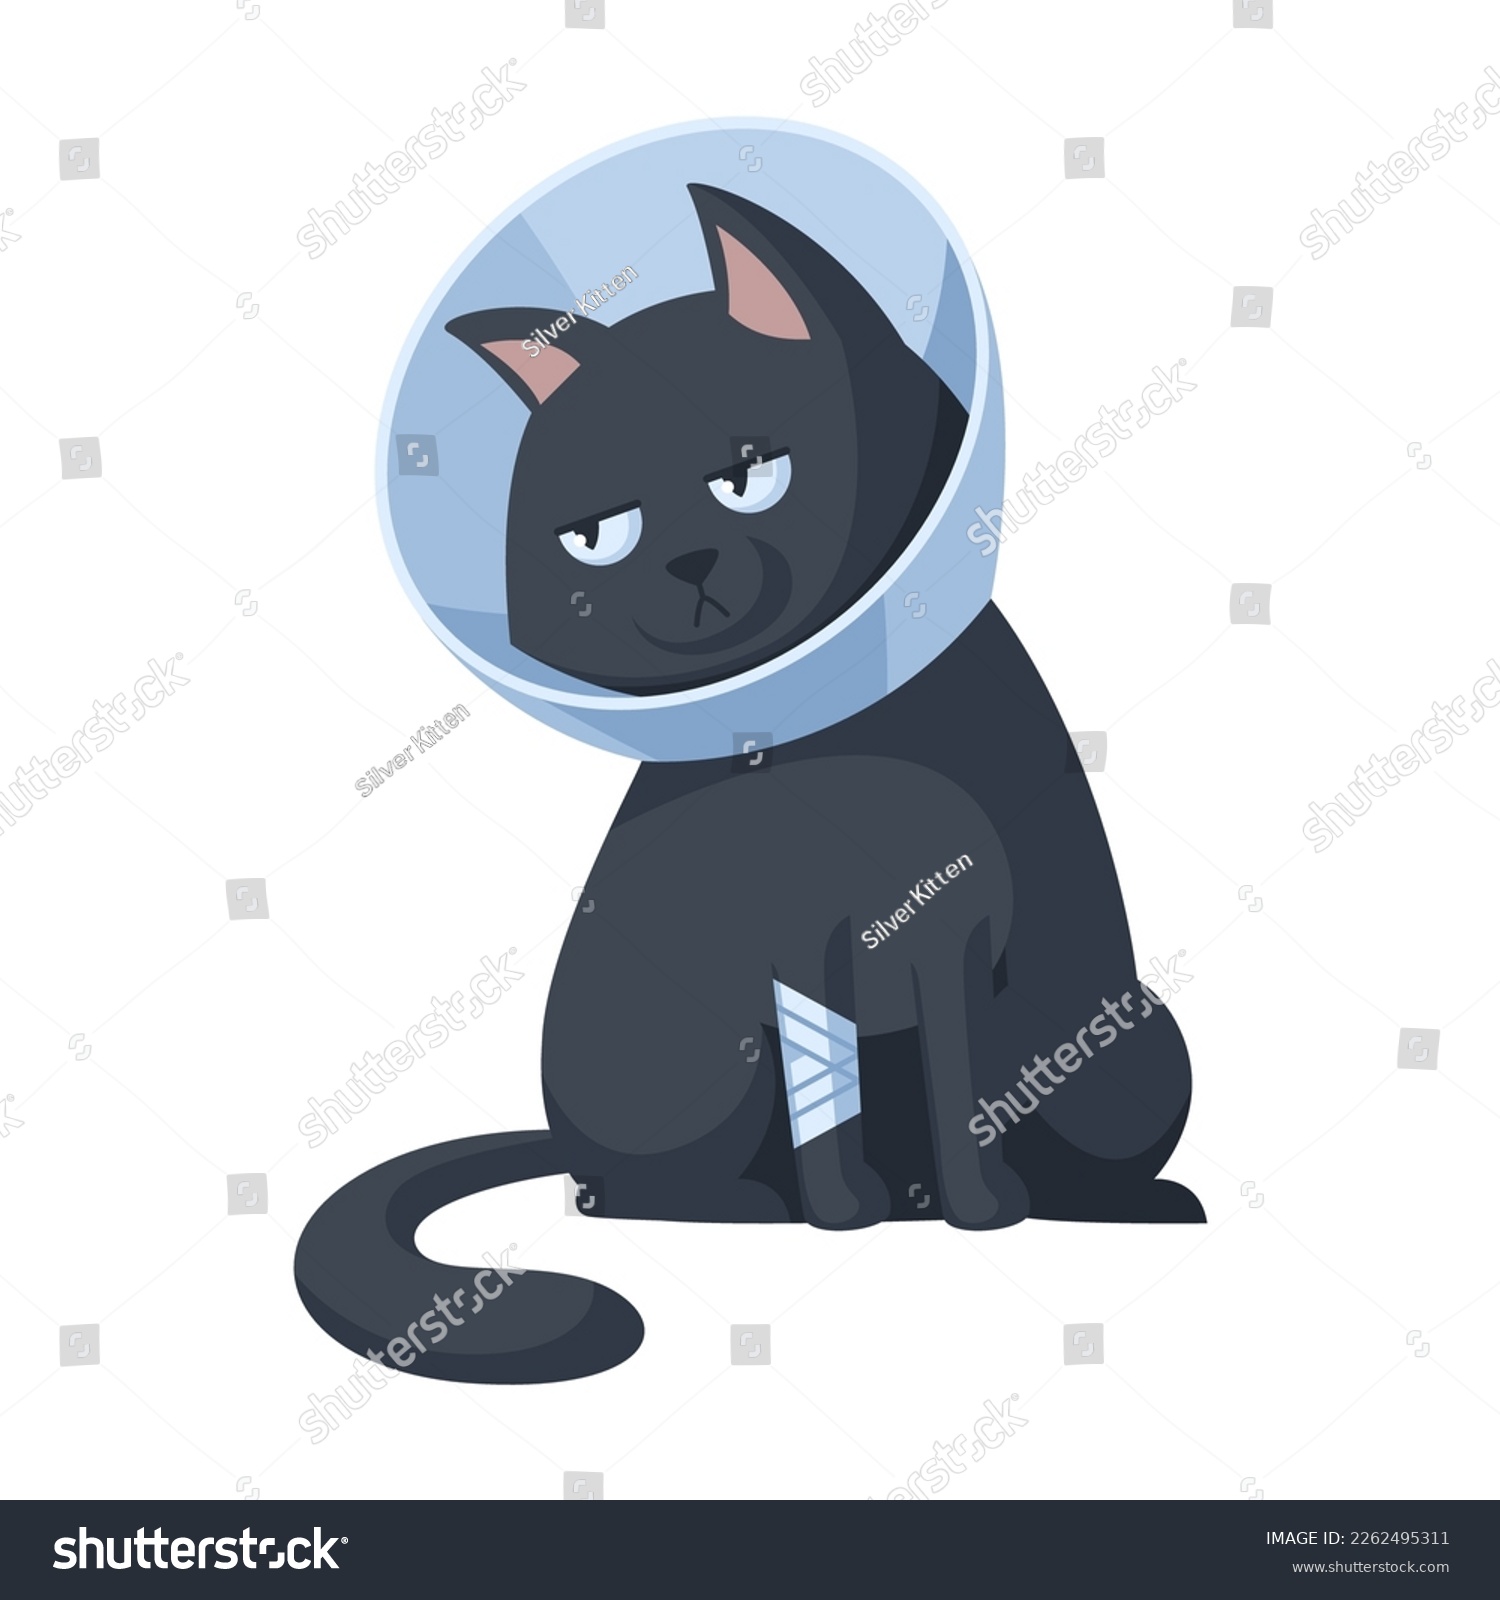 SVG of Sad black cat with a bandaged paw in a veterinary cone collar. Concept illustration of providing first aid to pets. Isolated on white background. svg